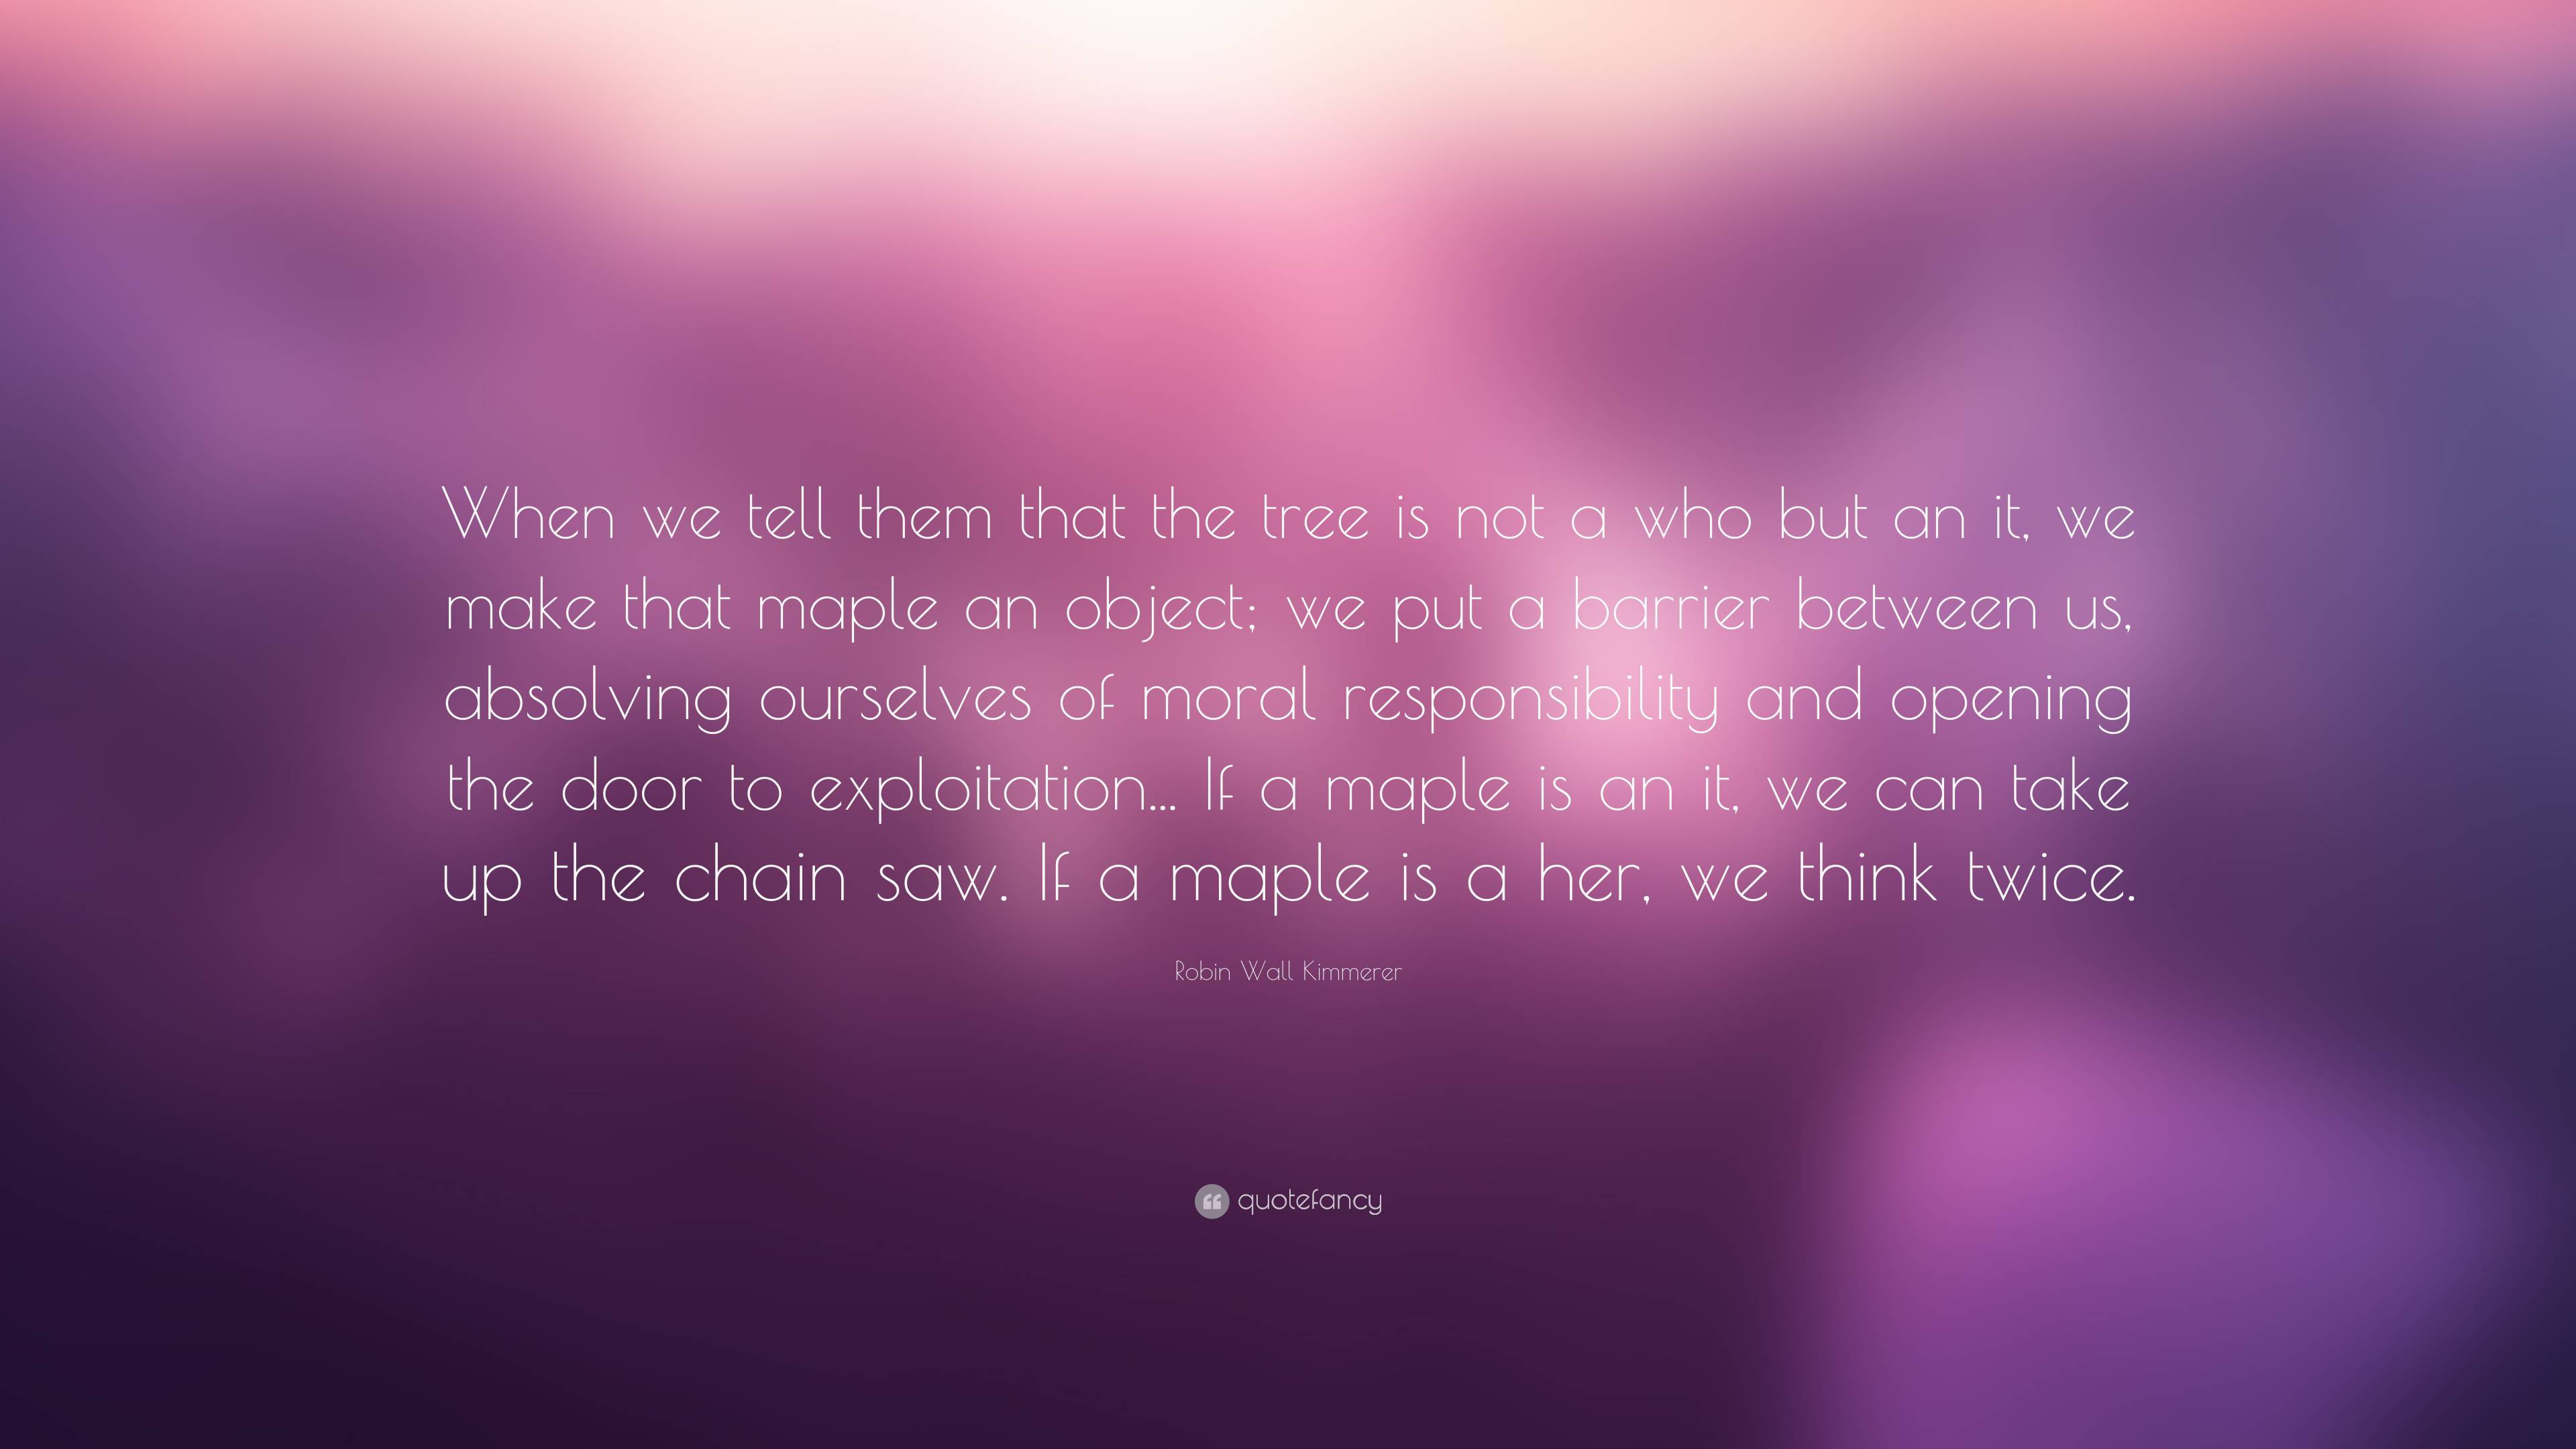 Robin Wall Kimmerer Quote: “When we tell them that the tree is not a ...